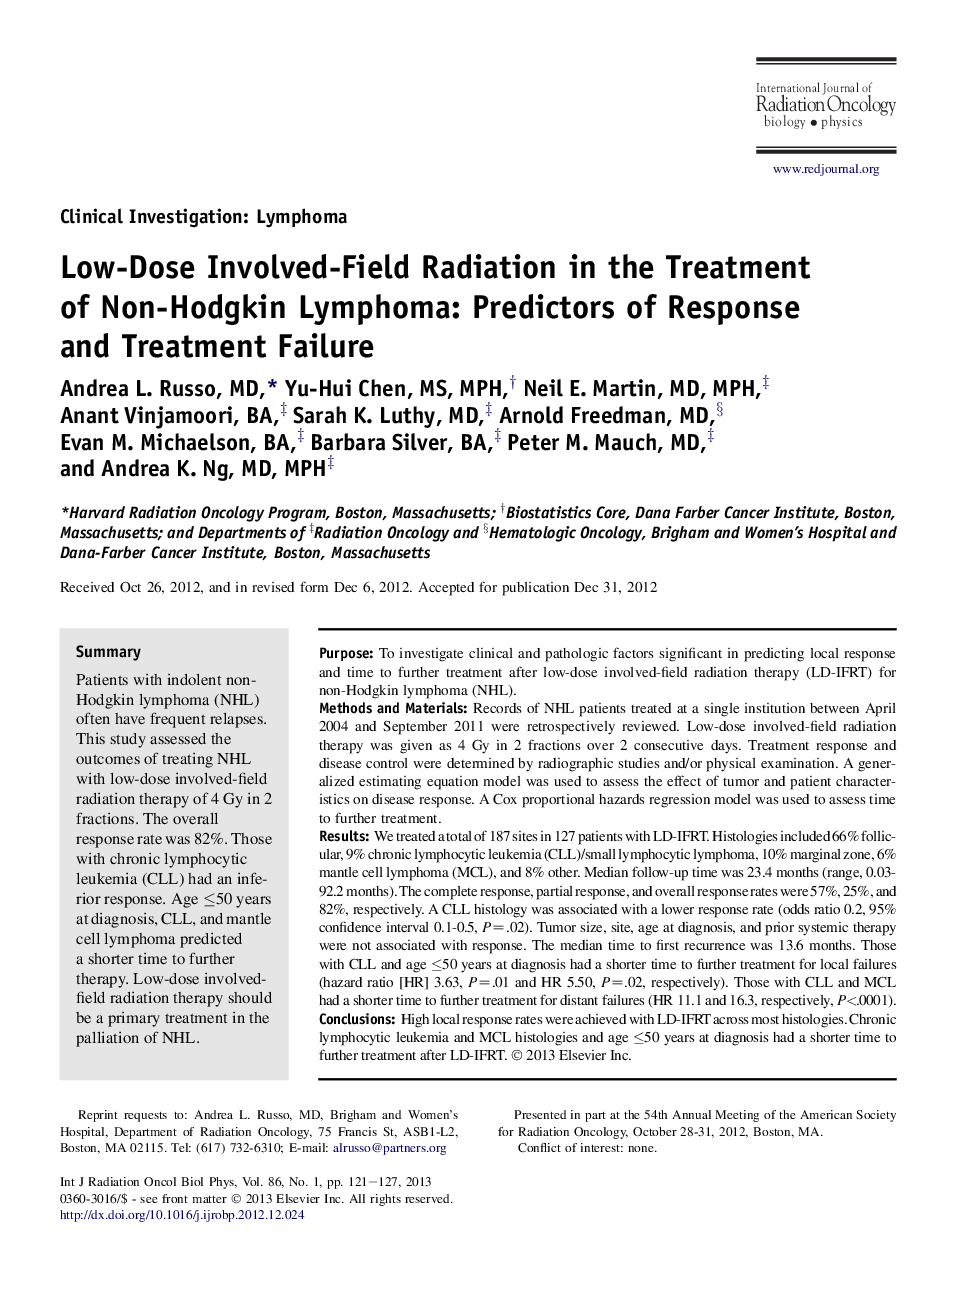 Low-Dose Involved-Field Radiation in the Treatment of Non-Hodgkin Lymphoma: Predictors of Response and Treatment Failure